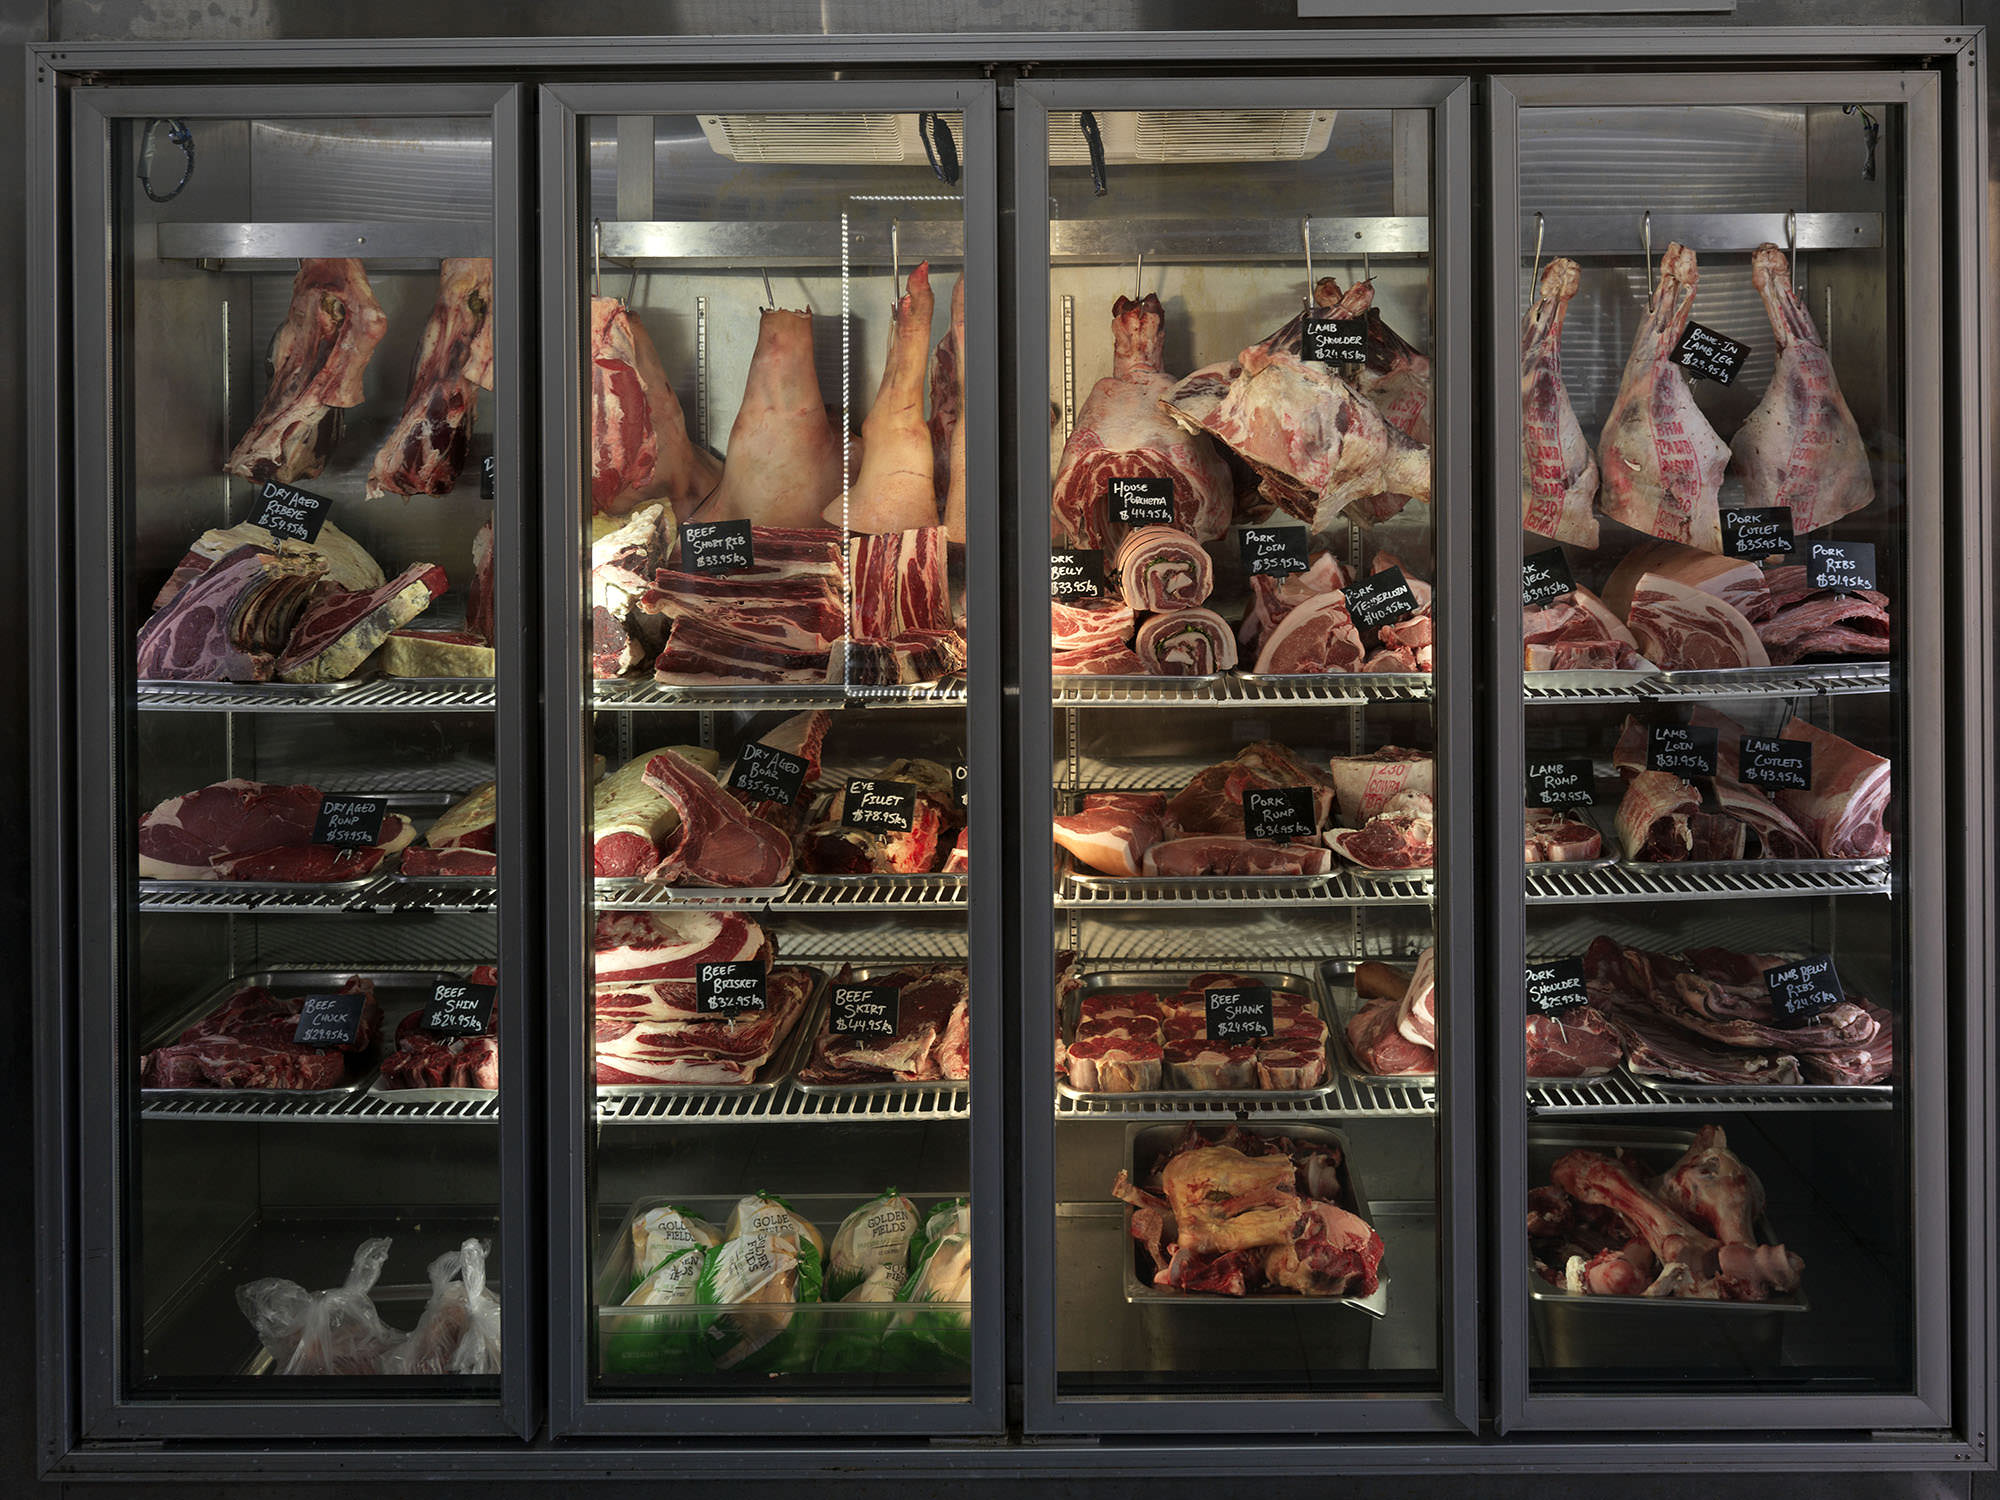 Fridges stocked with nose to tail dry aged produce at Whole Beast Butchery.